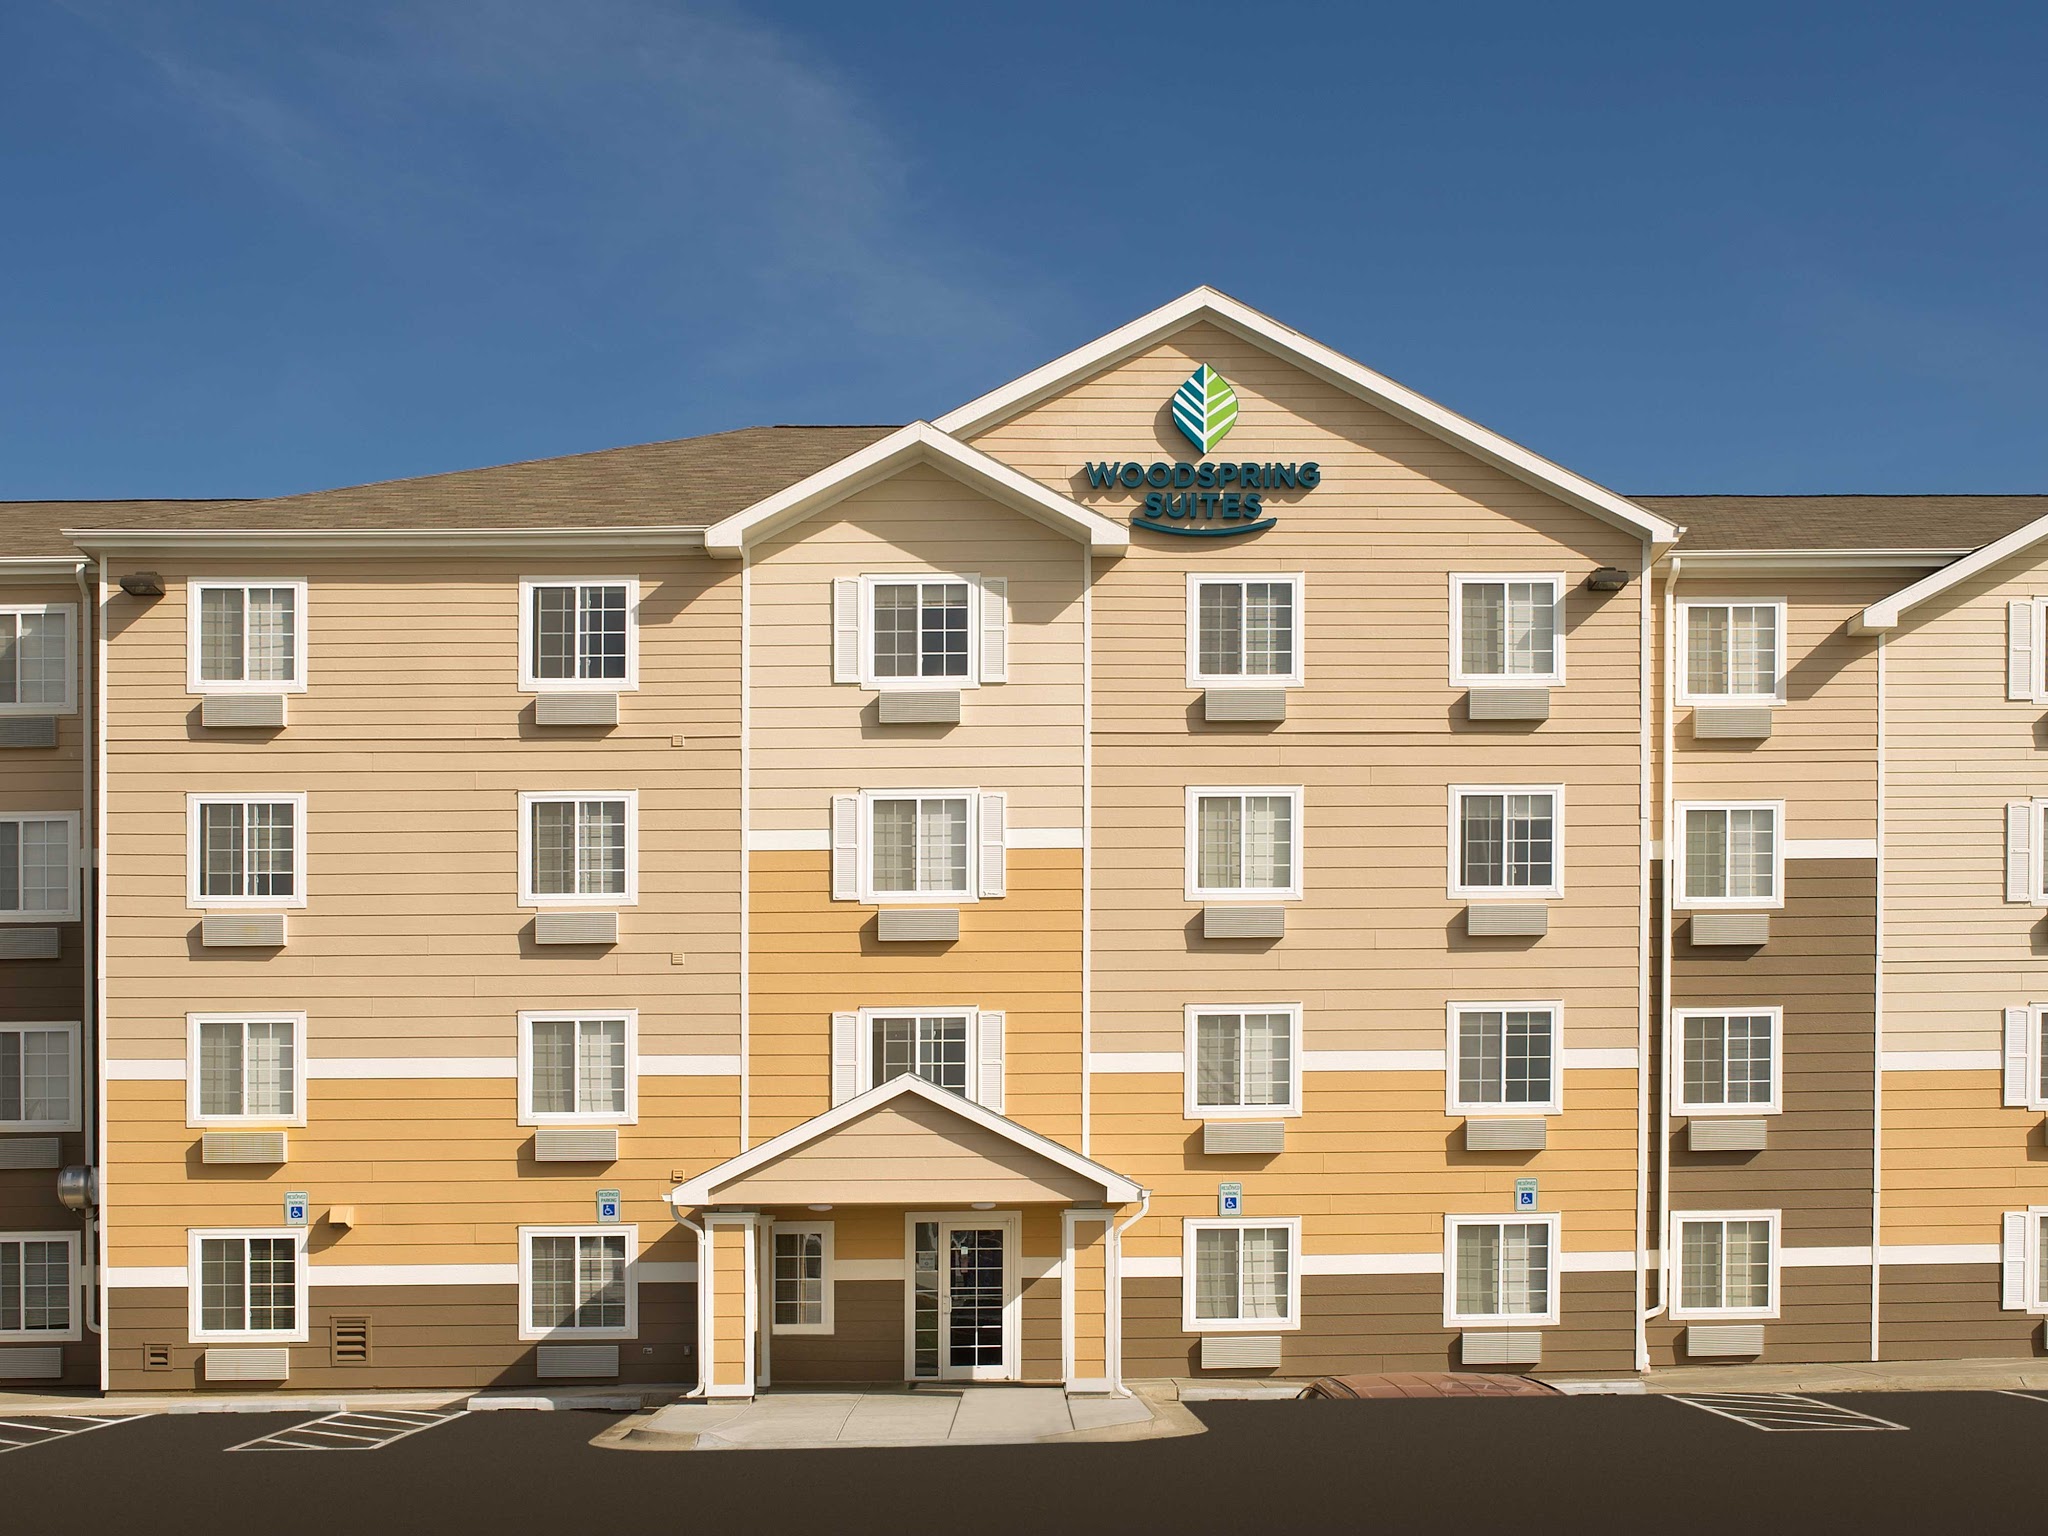 WoodSpring Suites Lincoln Photo